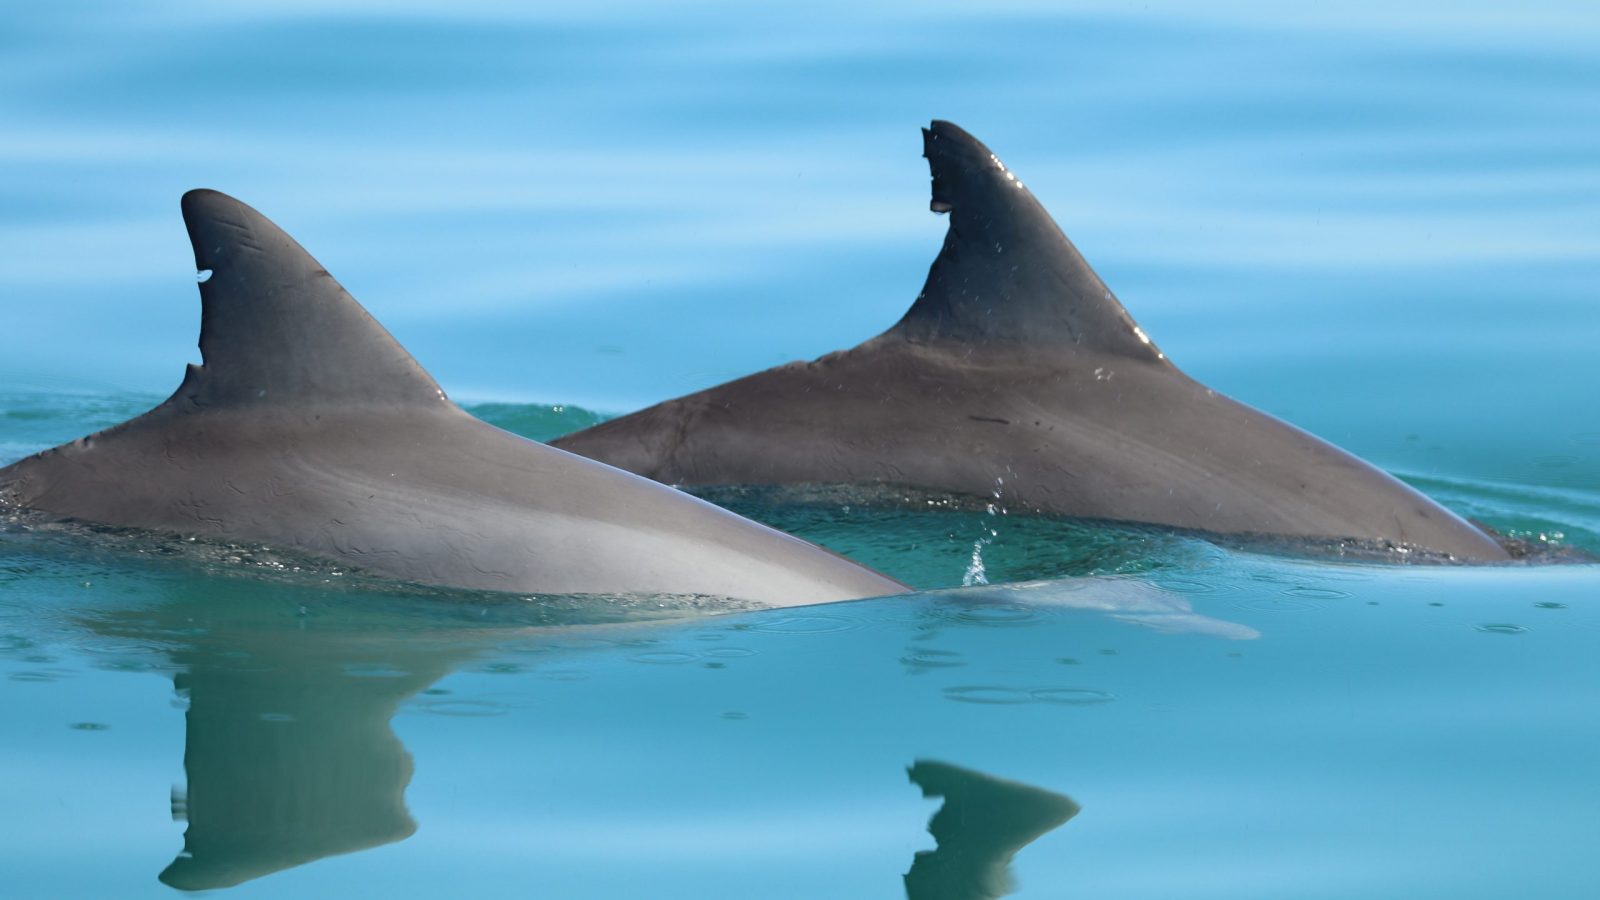 Two dolphin fins appear out of water